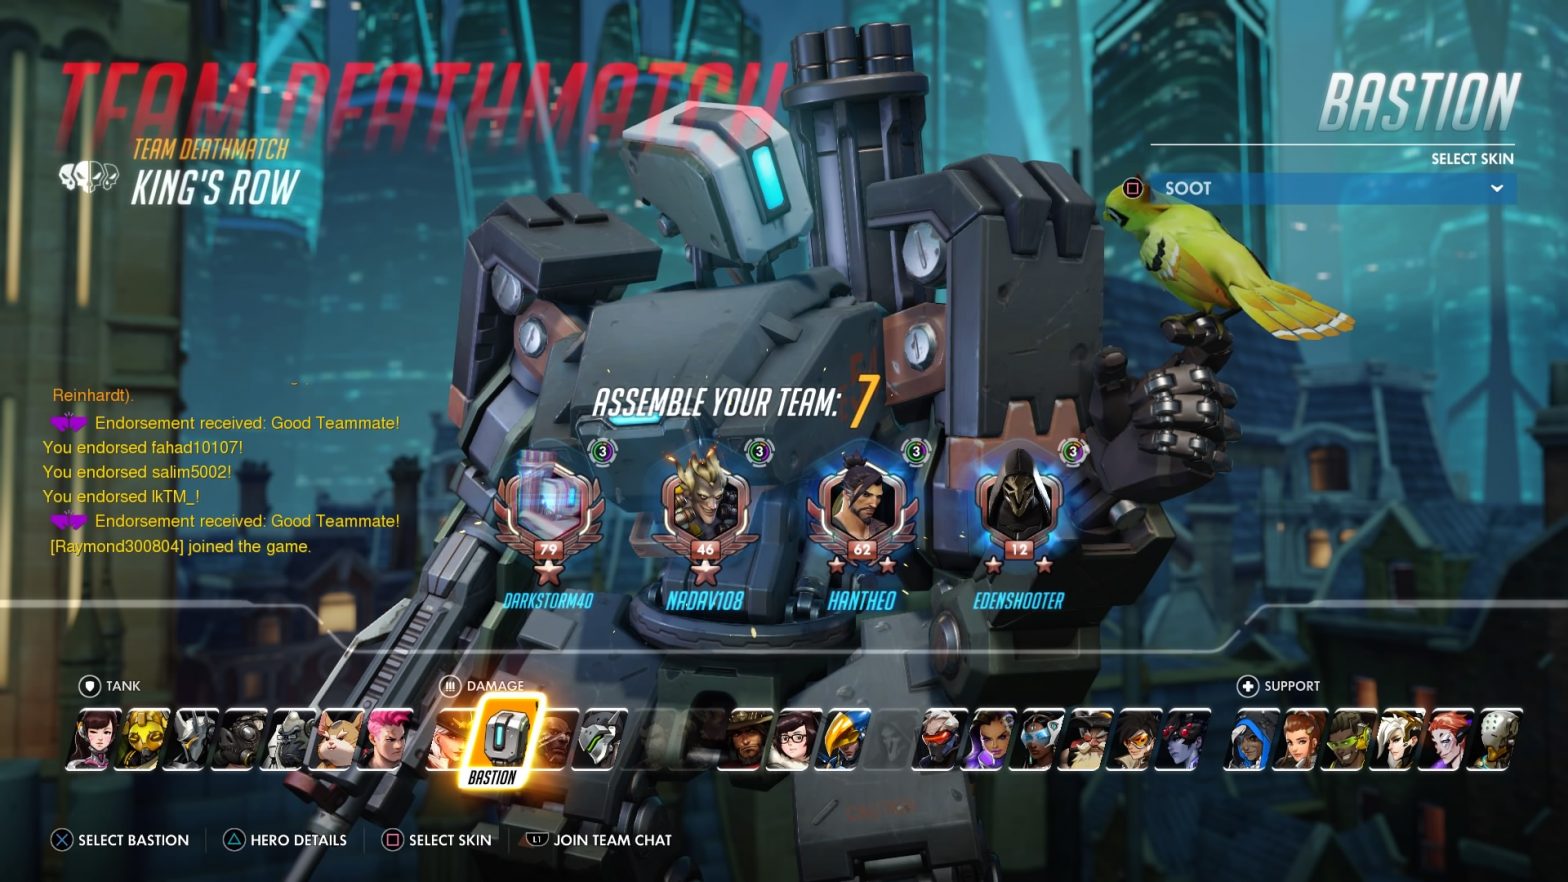 Why 4v4 Team Deathmatch makes a perfect Overwatch game